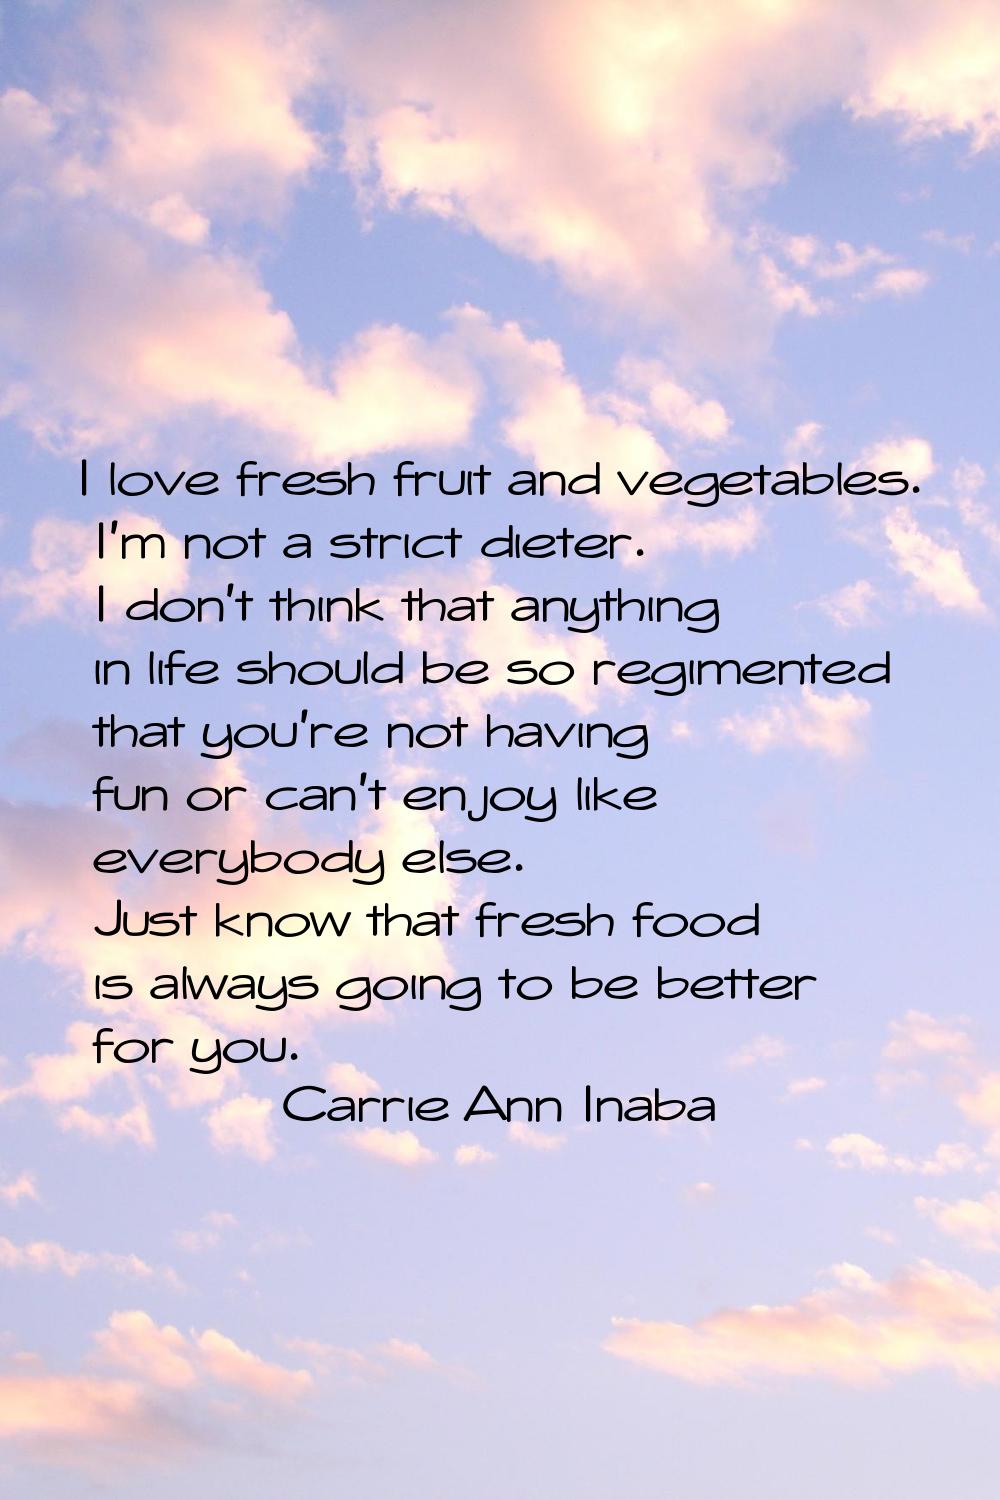 I love fresh fruit and vegetables. I'm not a strict dieter. I don't think that anything in life sho